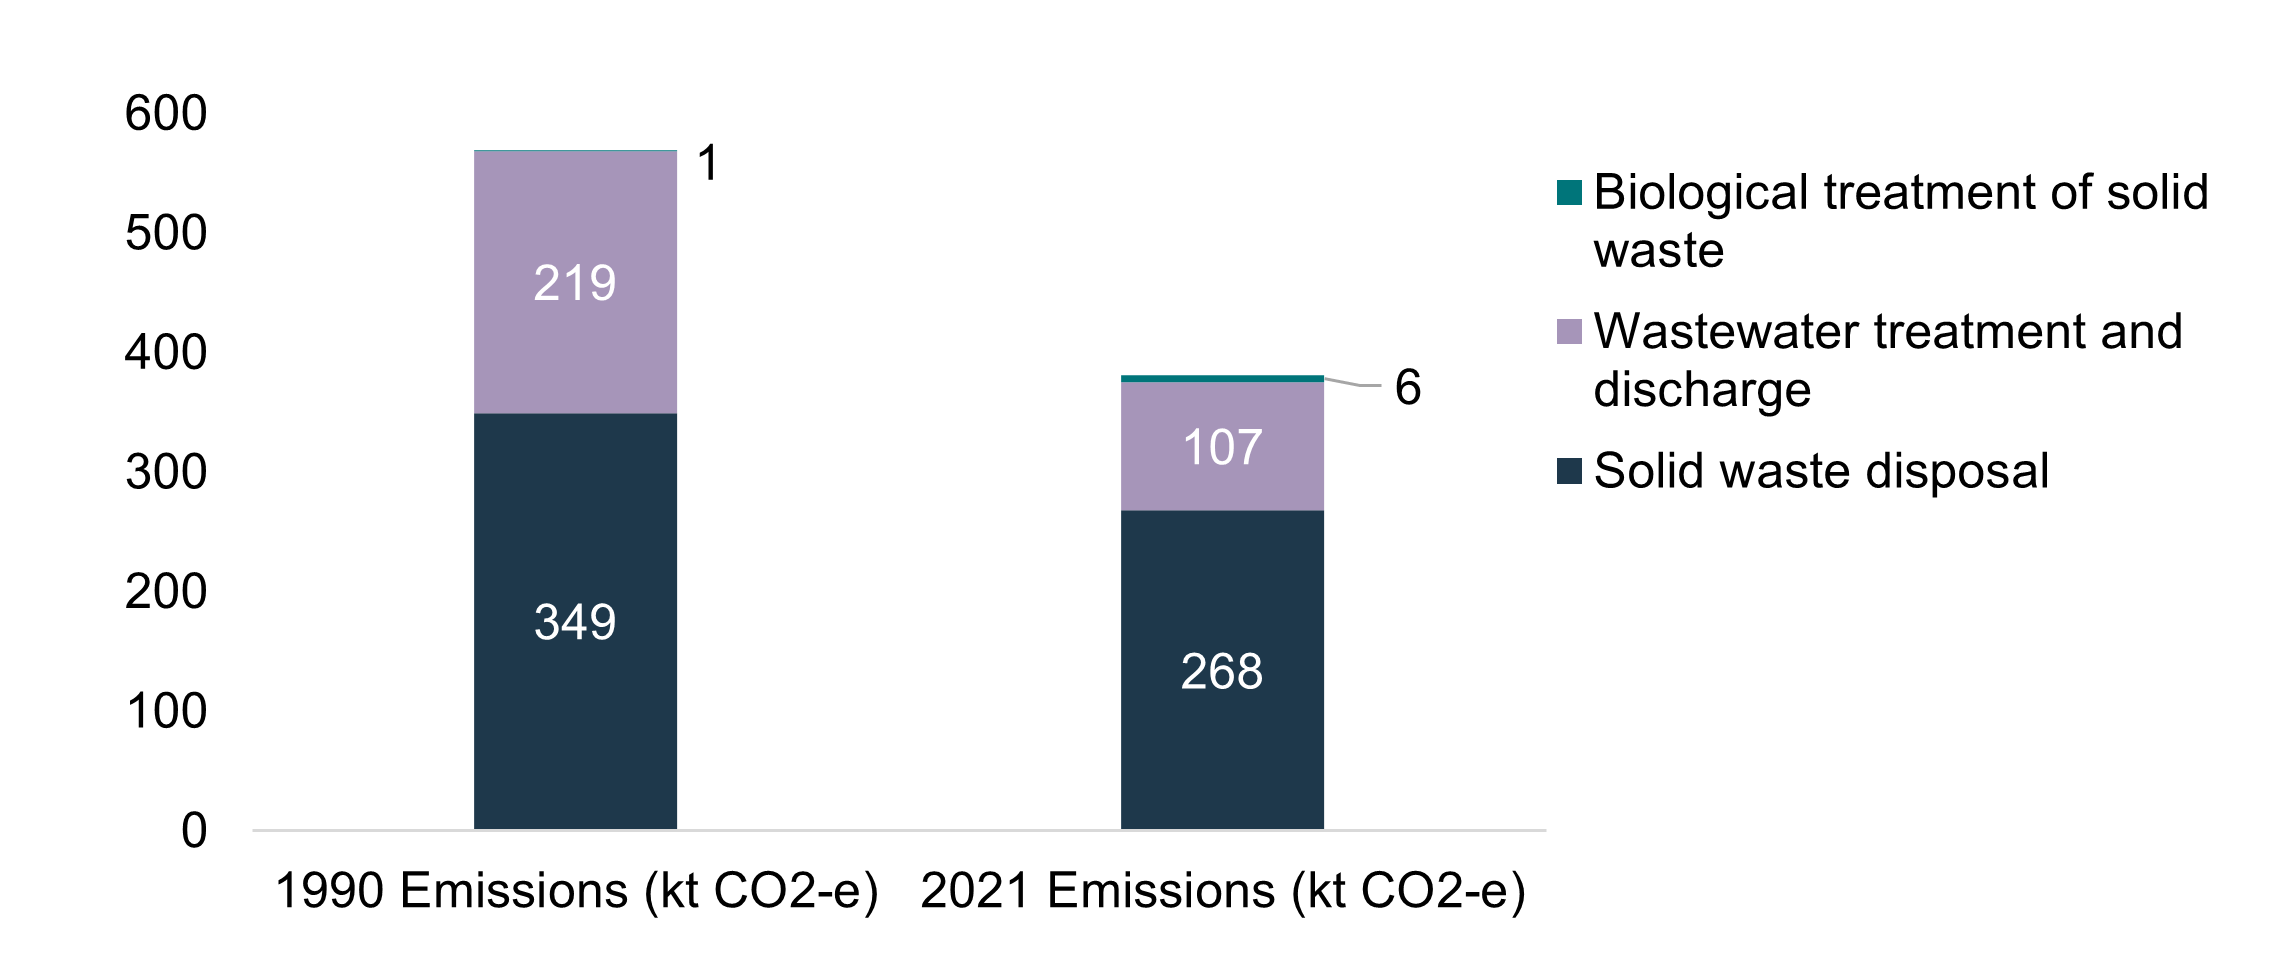 1990 Emissions (Kt CO2-e):  Solid waste disposal - 349 Wastewater treatment and discharge - 219 Biological treatment of solid waste - 1 2021 emissions (kt CO2-e): Solid waste disposal - 268 Wastewater treatment and discharge - 107 Biological treatment of solid waste - 6